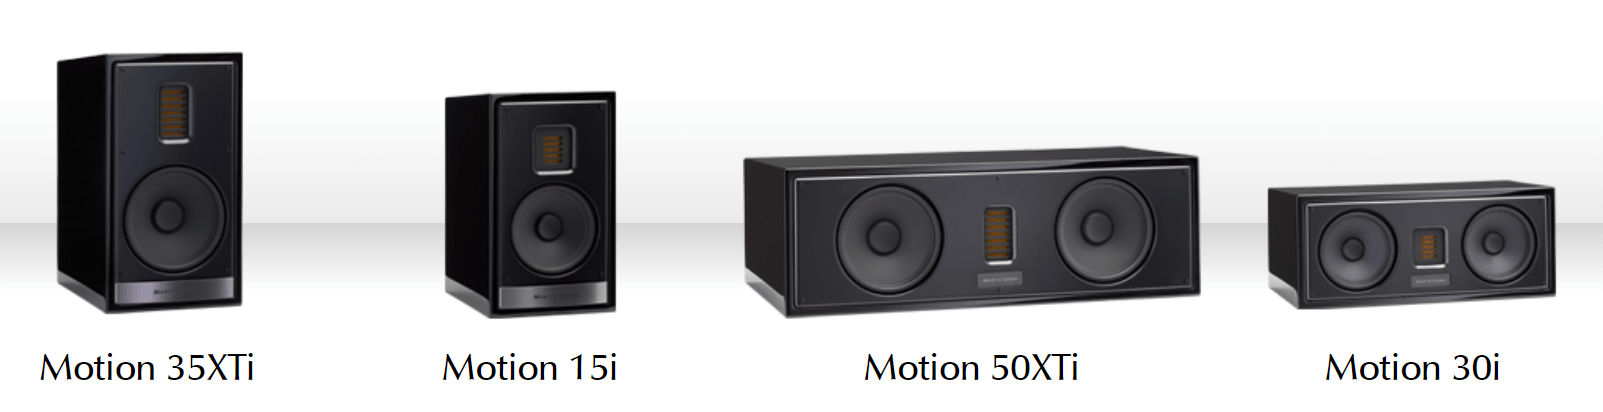 Best Buy has Black Friday prices on these awesome sounding speakers. b4644374 image